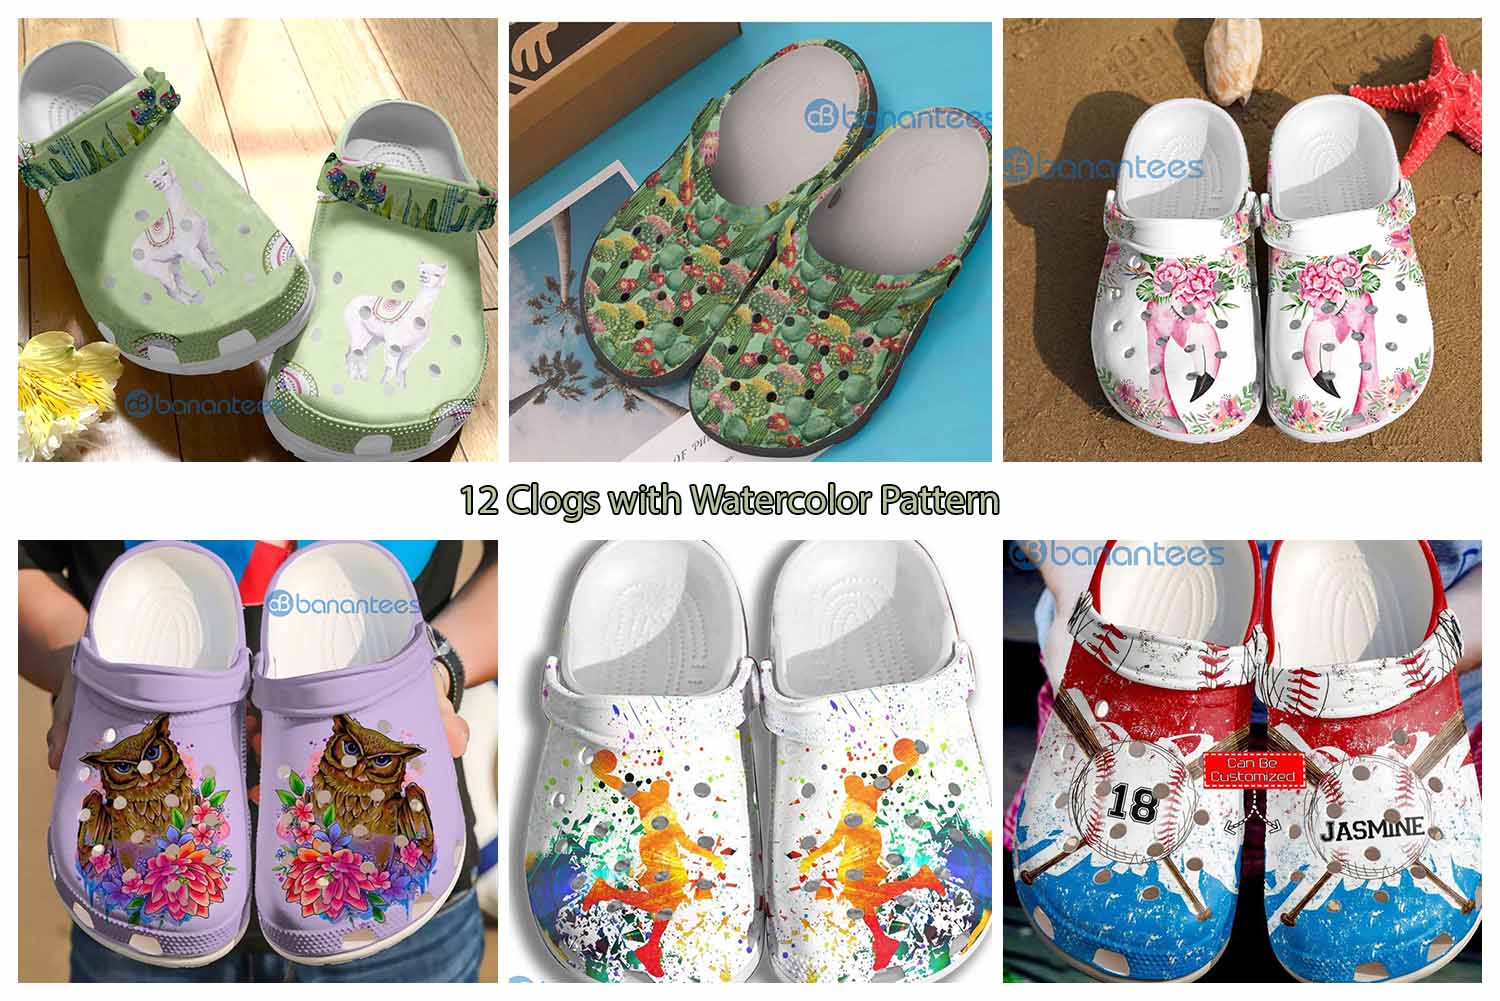 12 Clogs with Watercolor Pattern